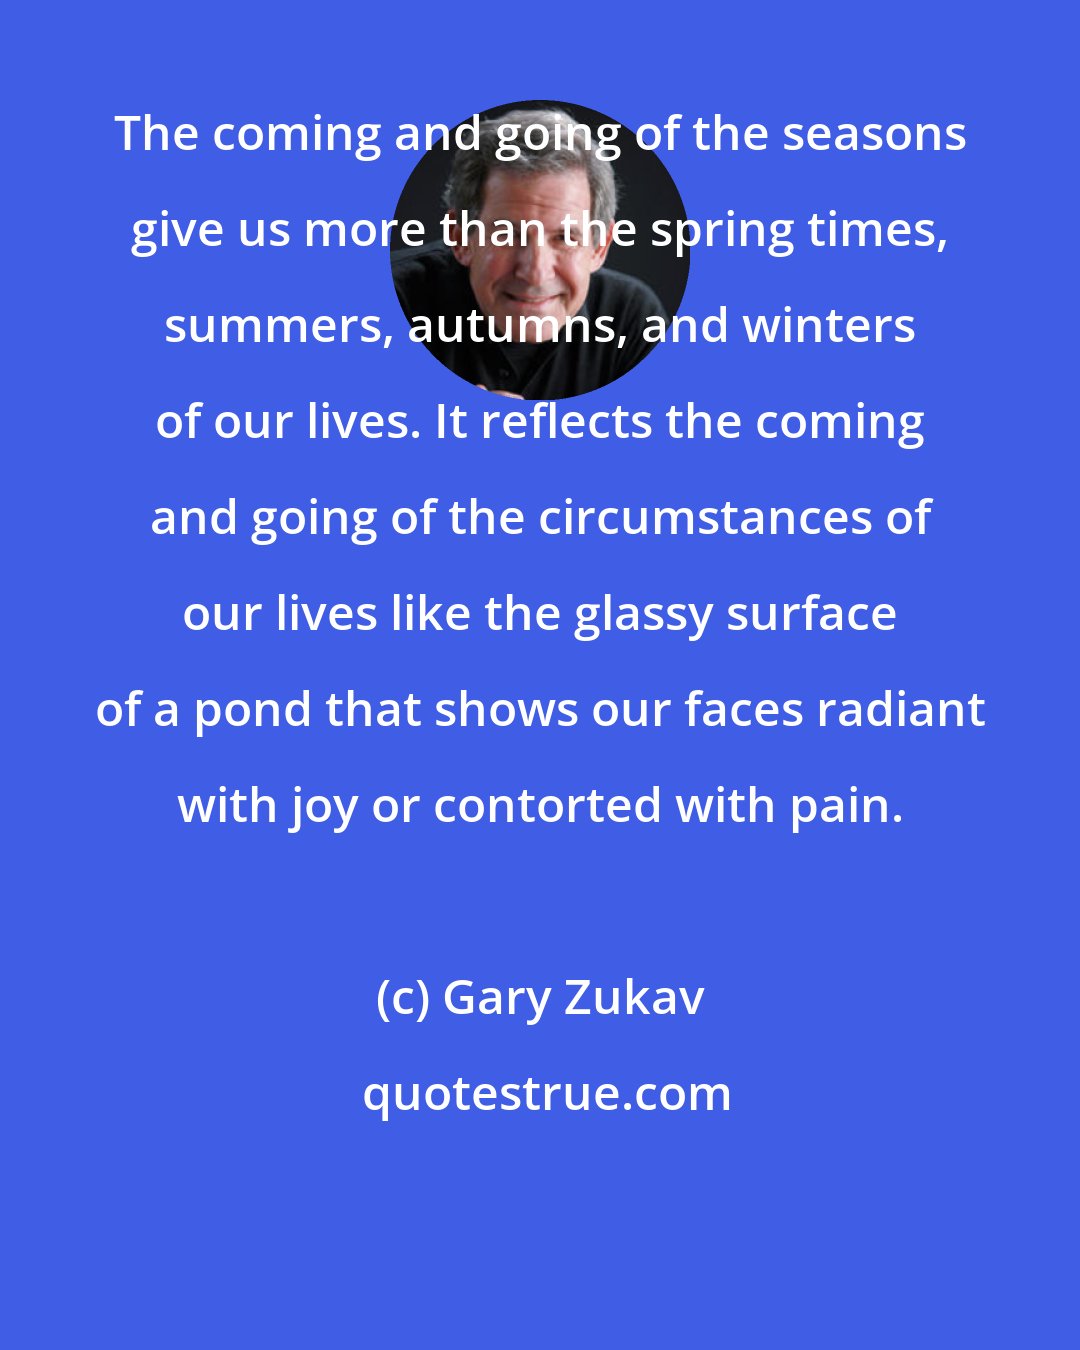 Gary Zukav: The coming and going of the seasons give us more than the spring times, summers, autumns, and winters of our lives. It reflects the coming and going of the circumstances of our lives like the glassy surface of a pond that shows our faces radiant with joy or contorted with pain.